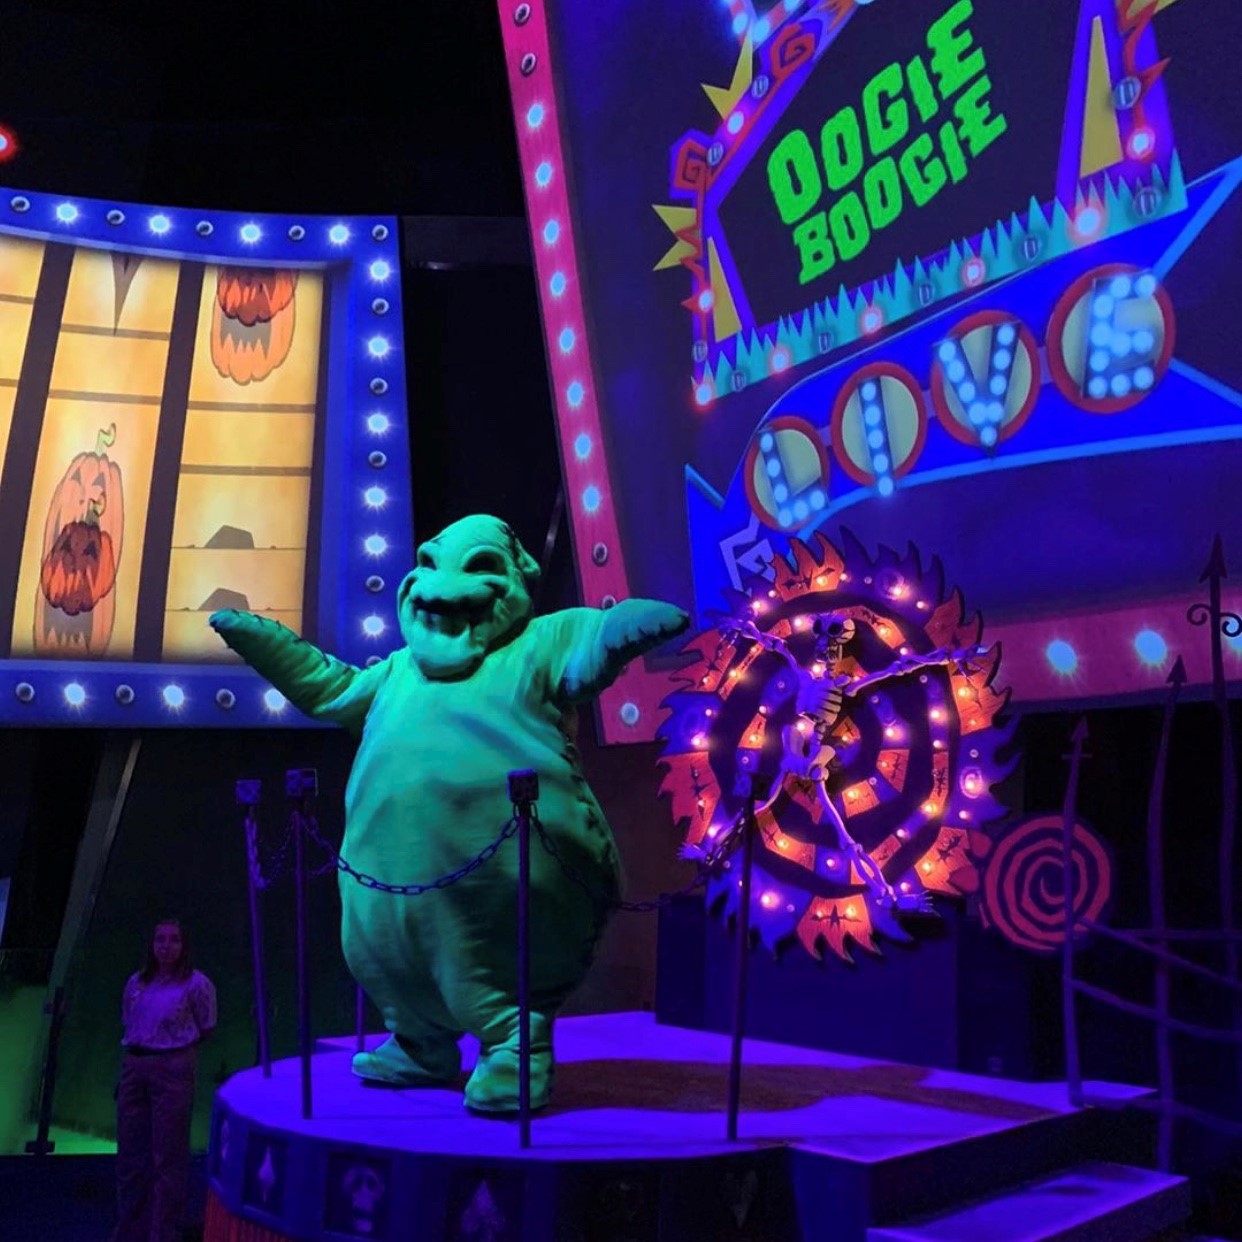 The Disneyland Resort Releases More Tickets For The Oogie Boogie Bash